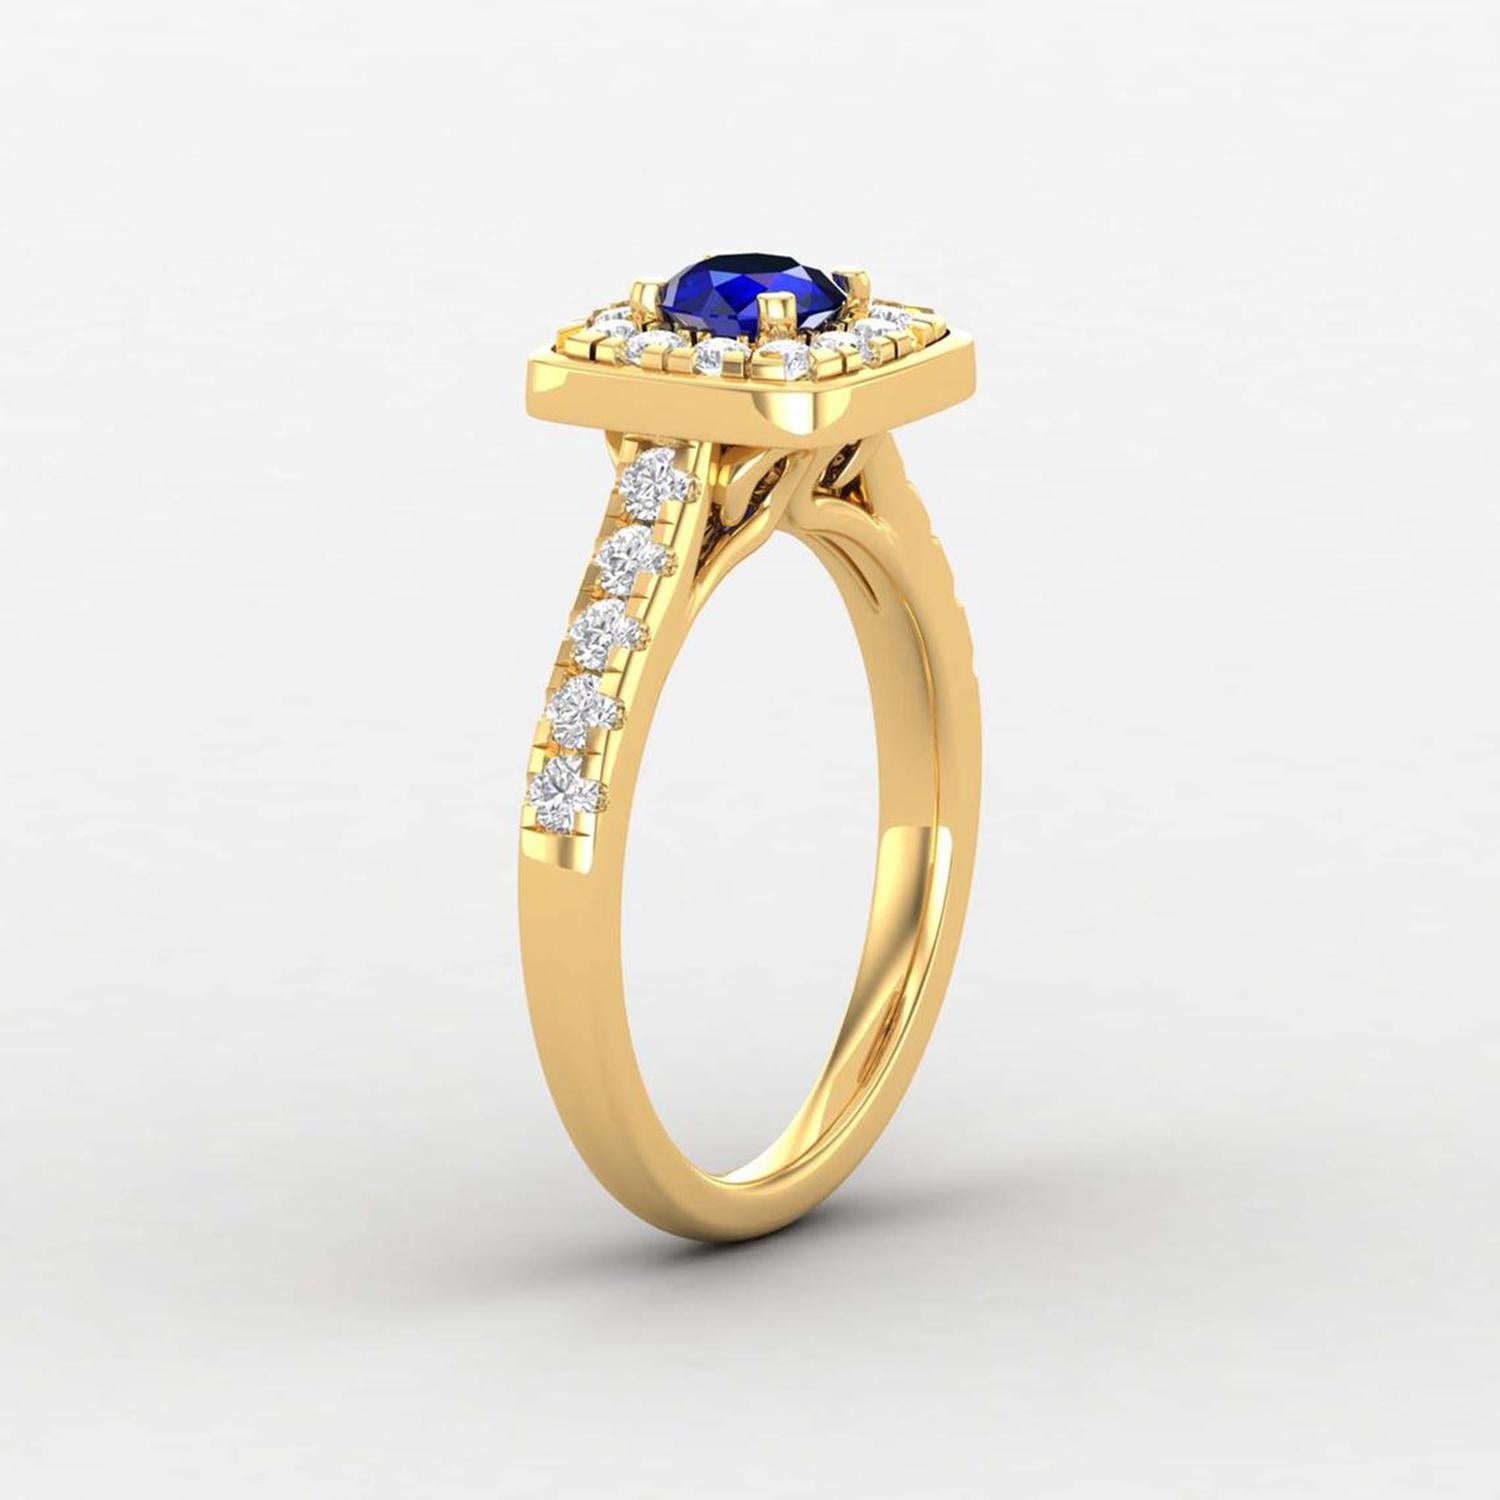 Round Cut 14 Karat Gold Round 5 MM Blue Sapphire Ring / 2 MM Diamond Ring / Solitaire Ring For Sale